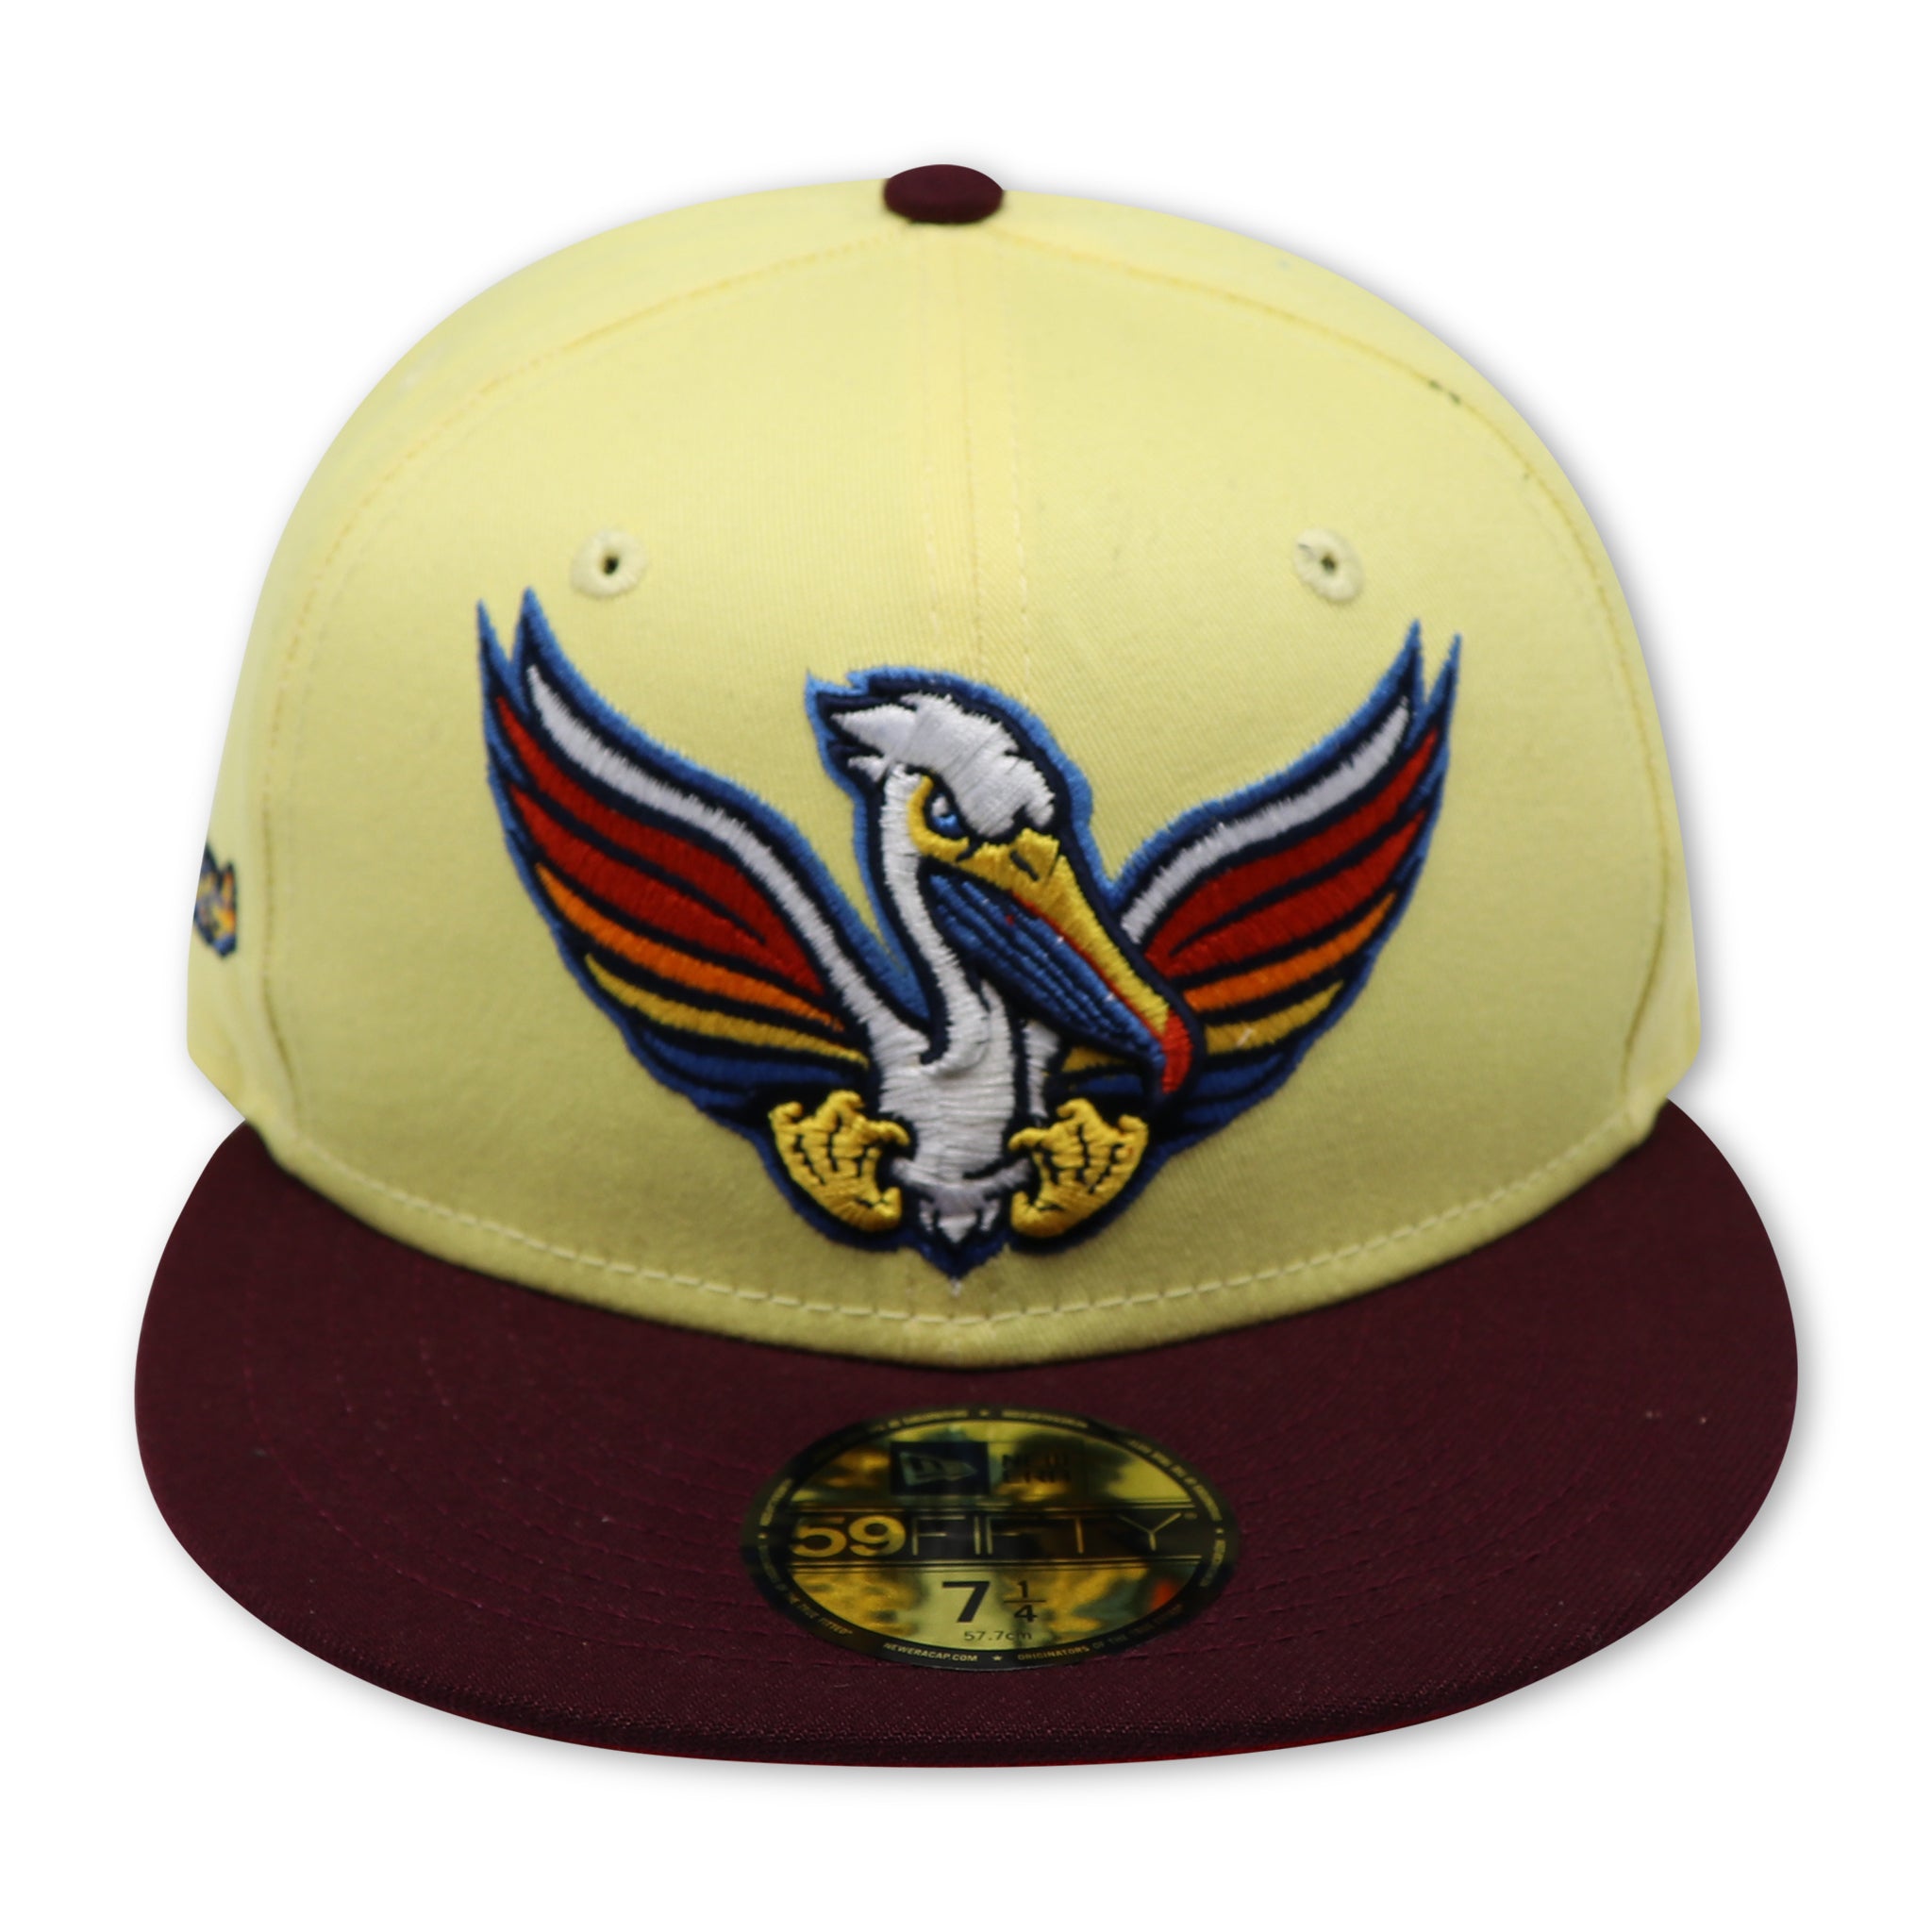 MYRTLE BEACH PELICANS (YELLOW) NEW ERA 59FIFTY FITTED (RED UNDER VISOR)